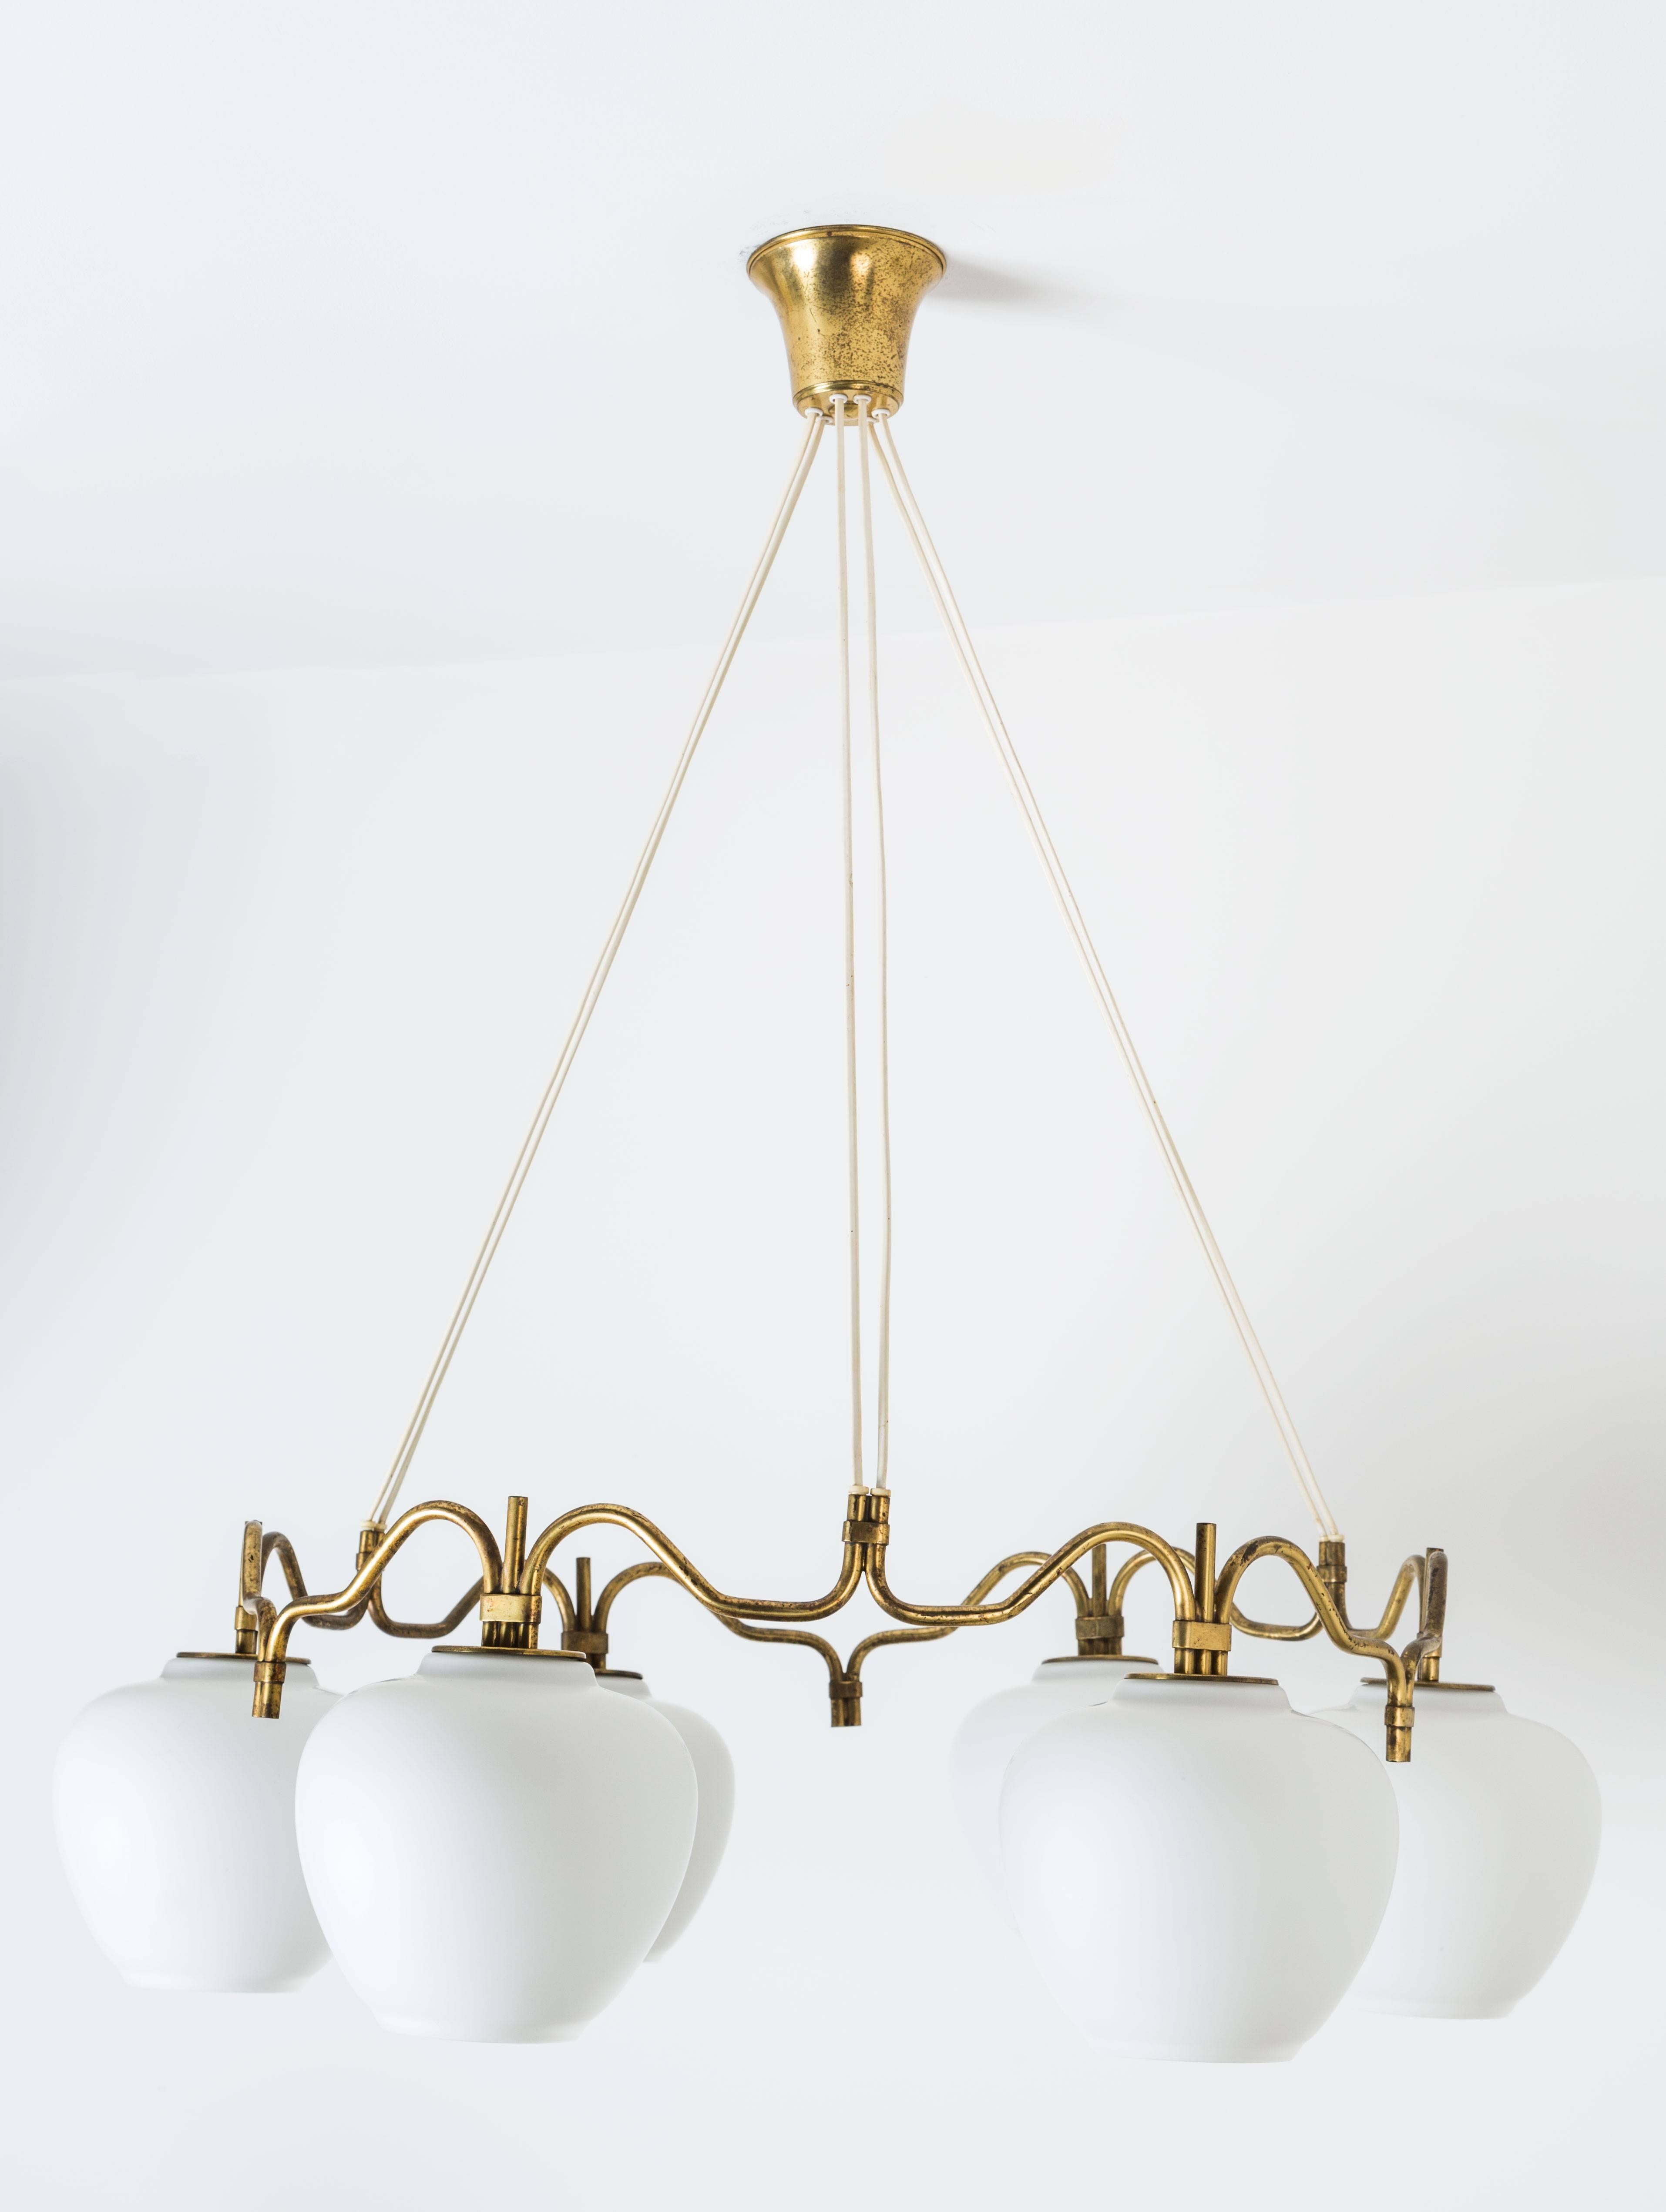 Brushed Six Globe Brass and Satin Glass Chandelier by Bent Karlby for Lyfa